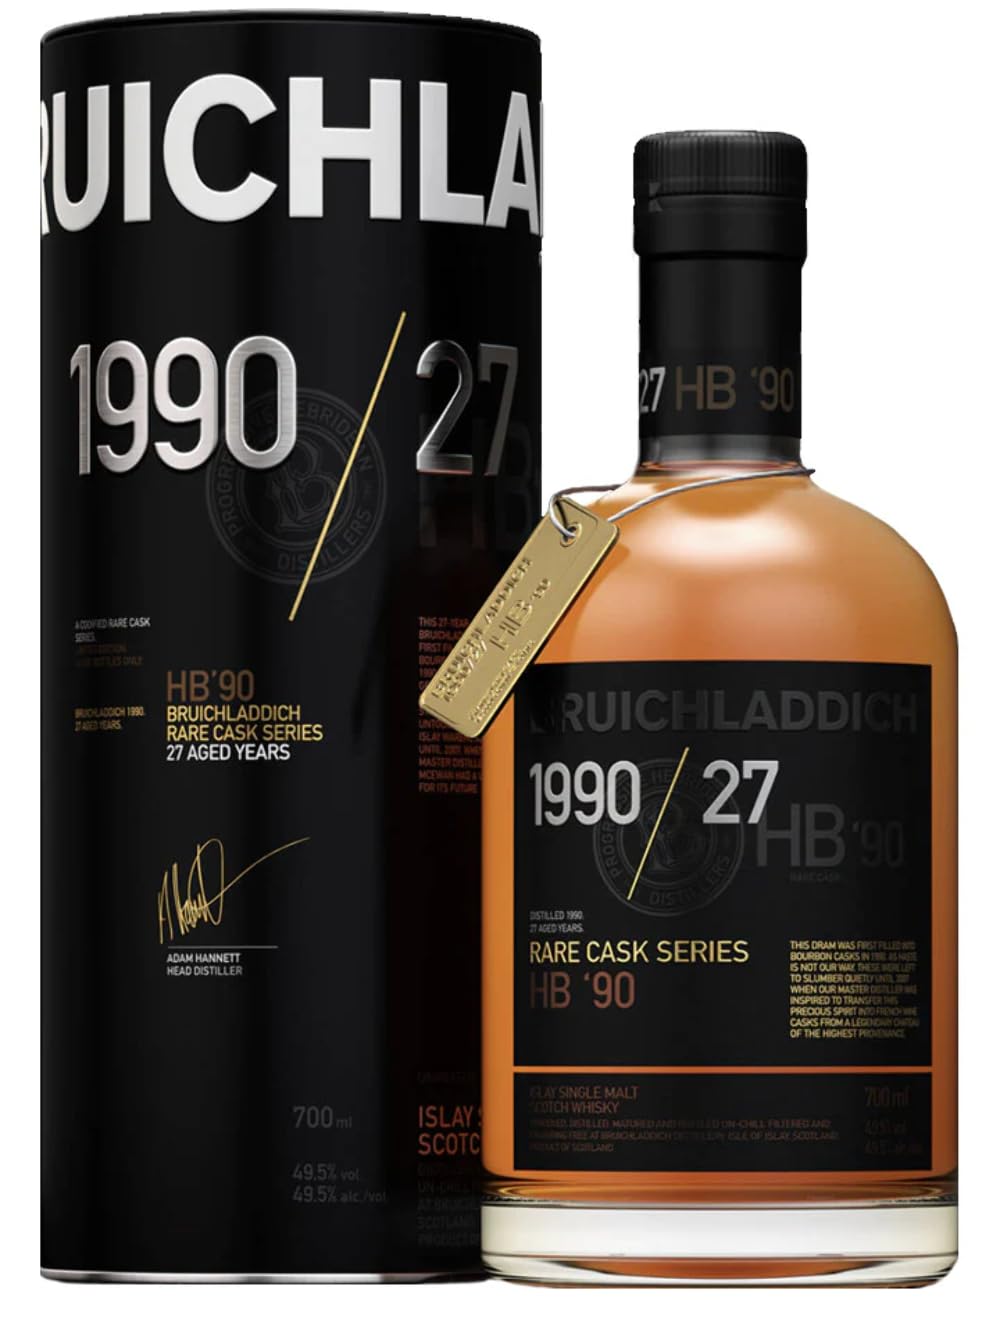 Bruichladdich 277 Years Old HB '90 RARE CASKERIES Whisky (1 x 0.7 l)